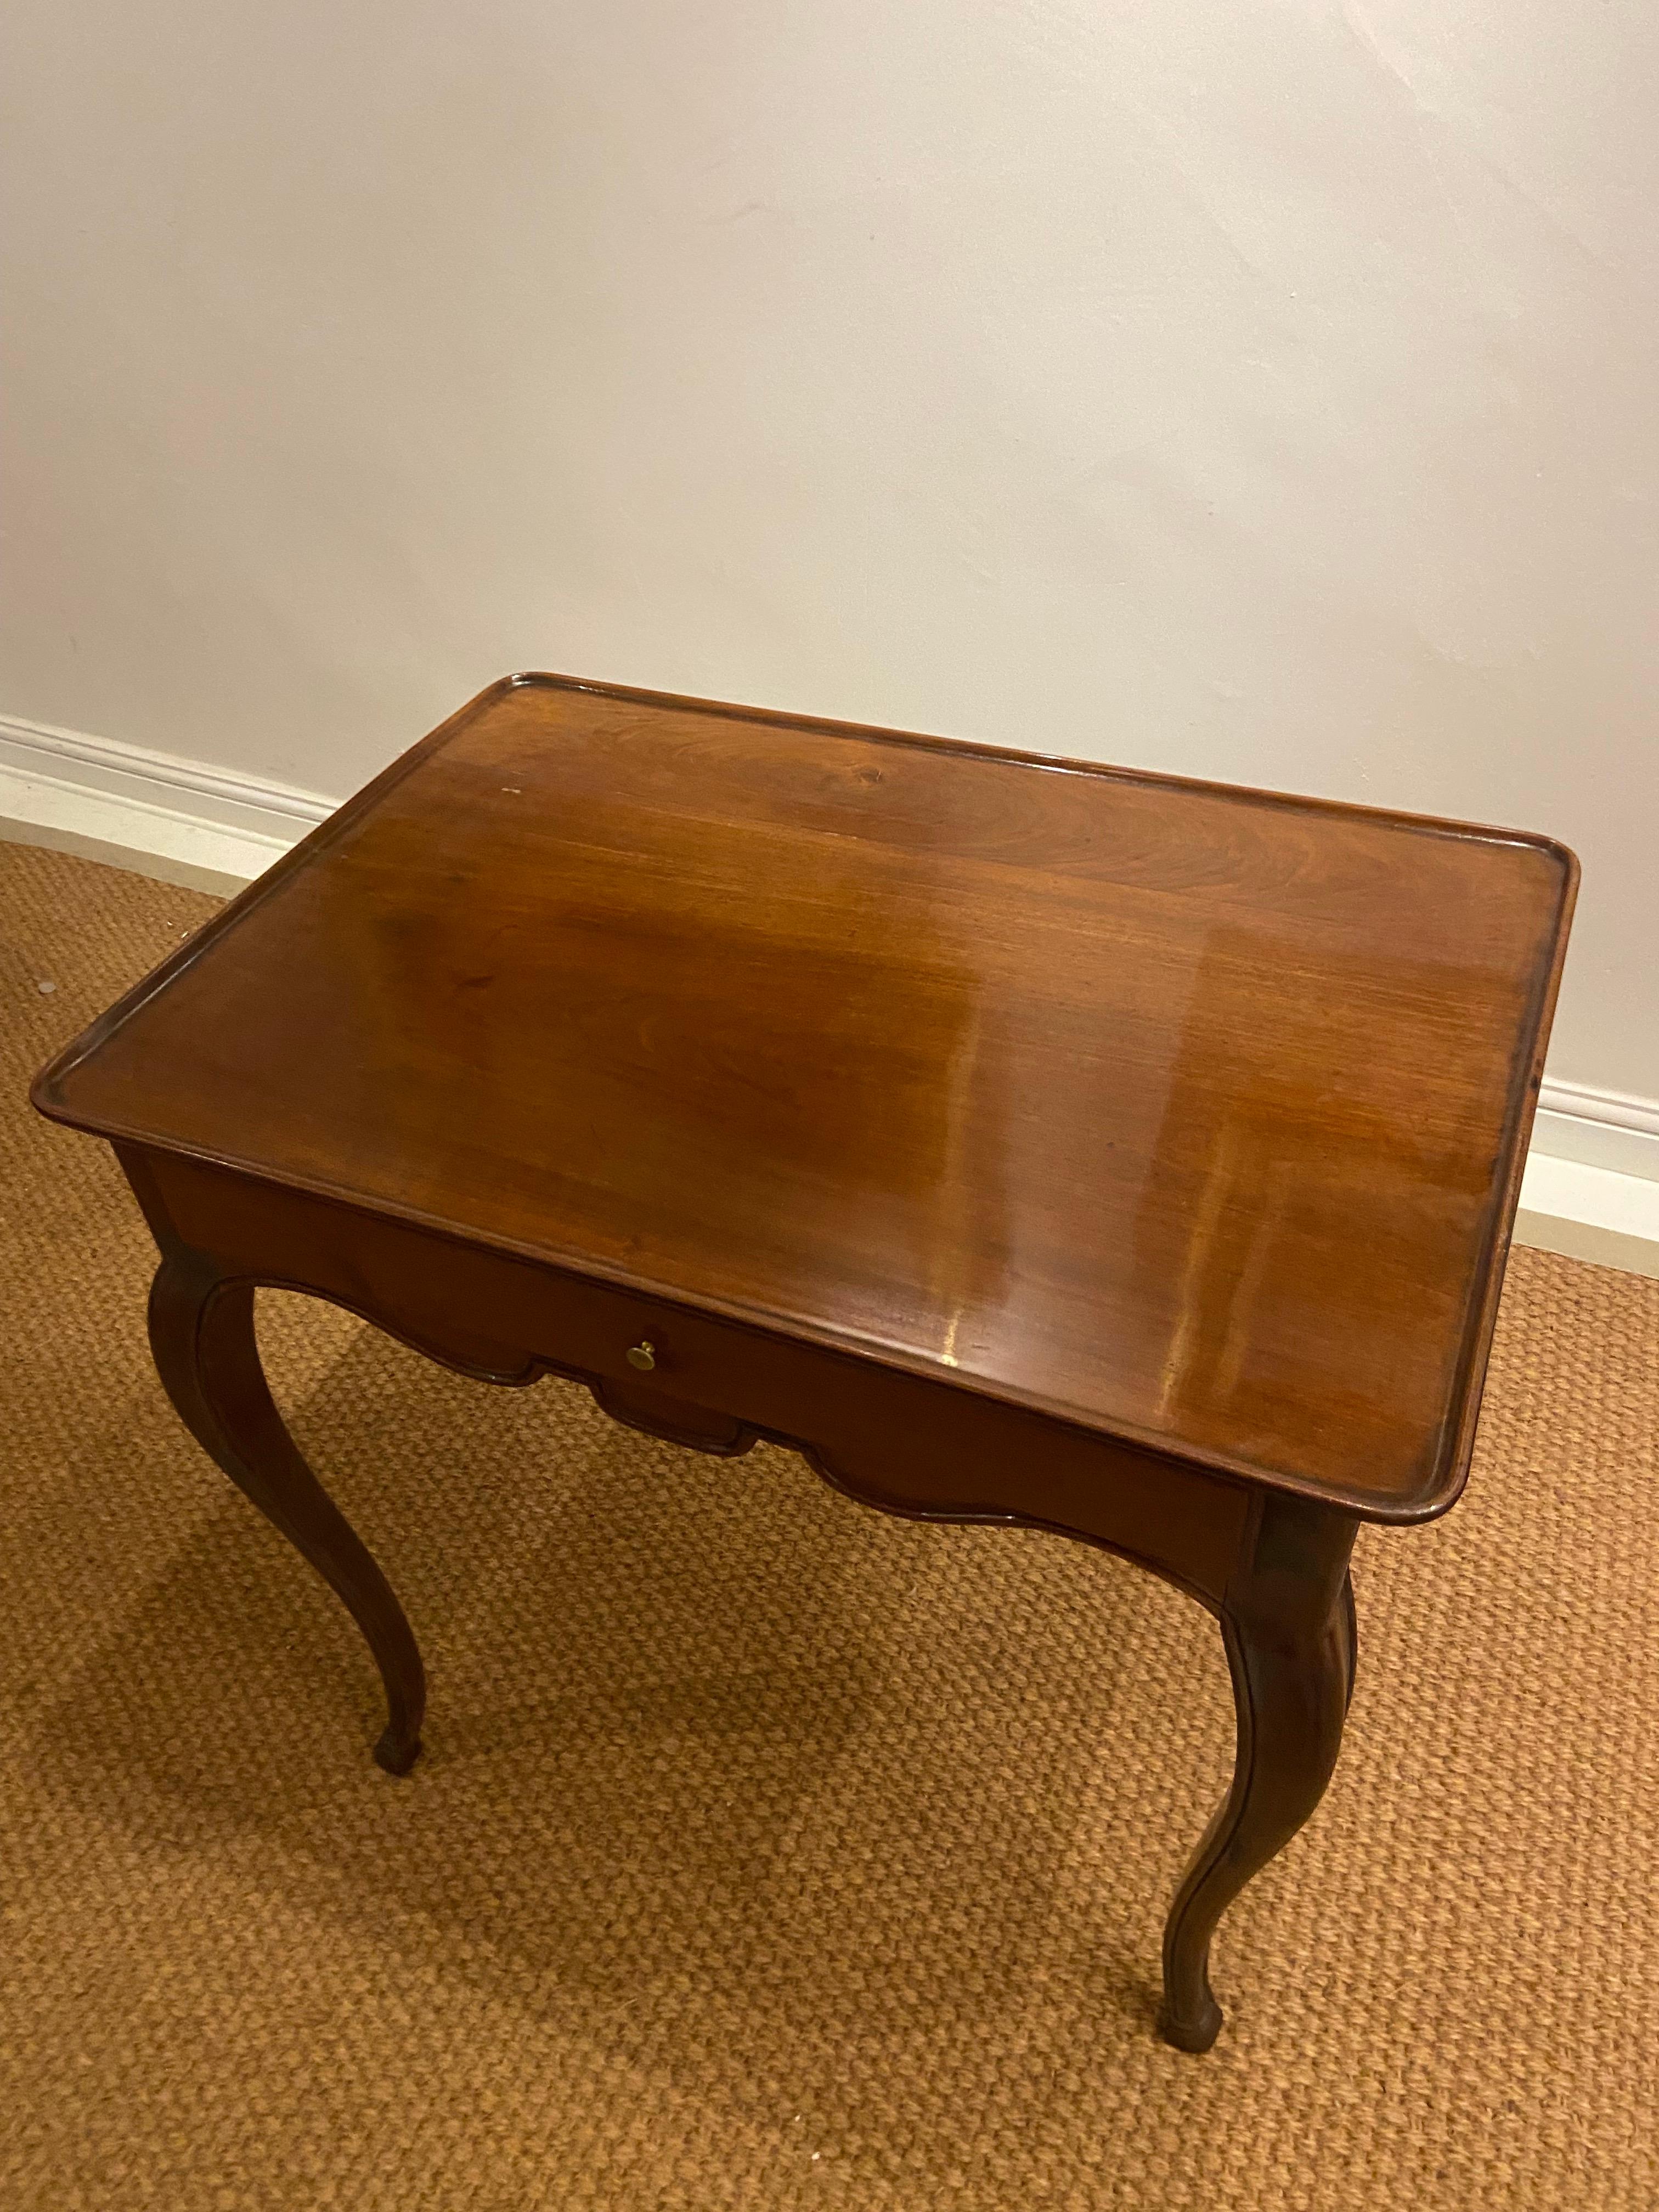 French Provincial Mahogany Table, 'Mid-18th Century' For Sale 2